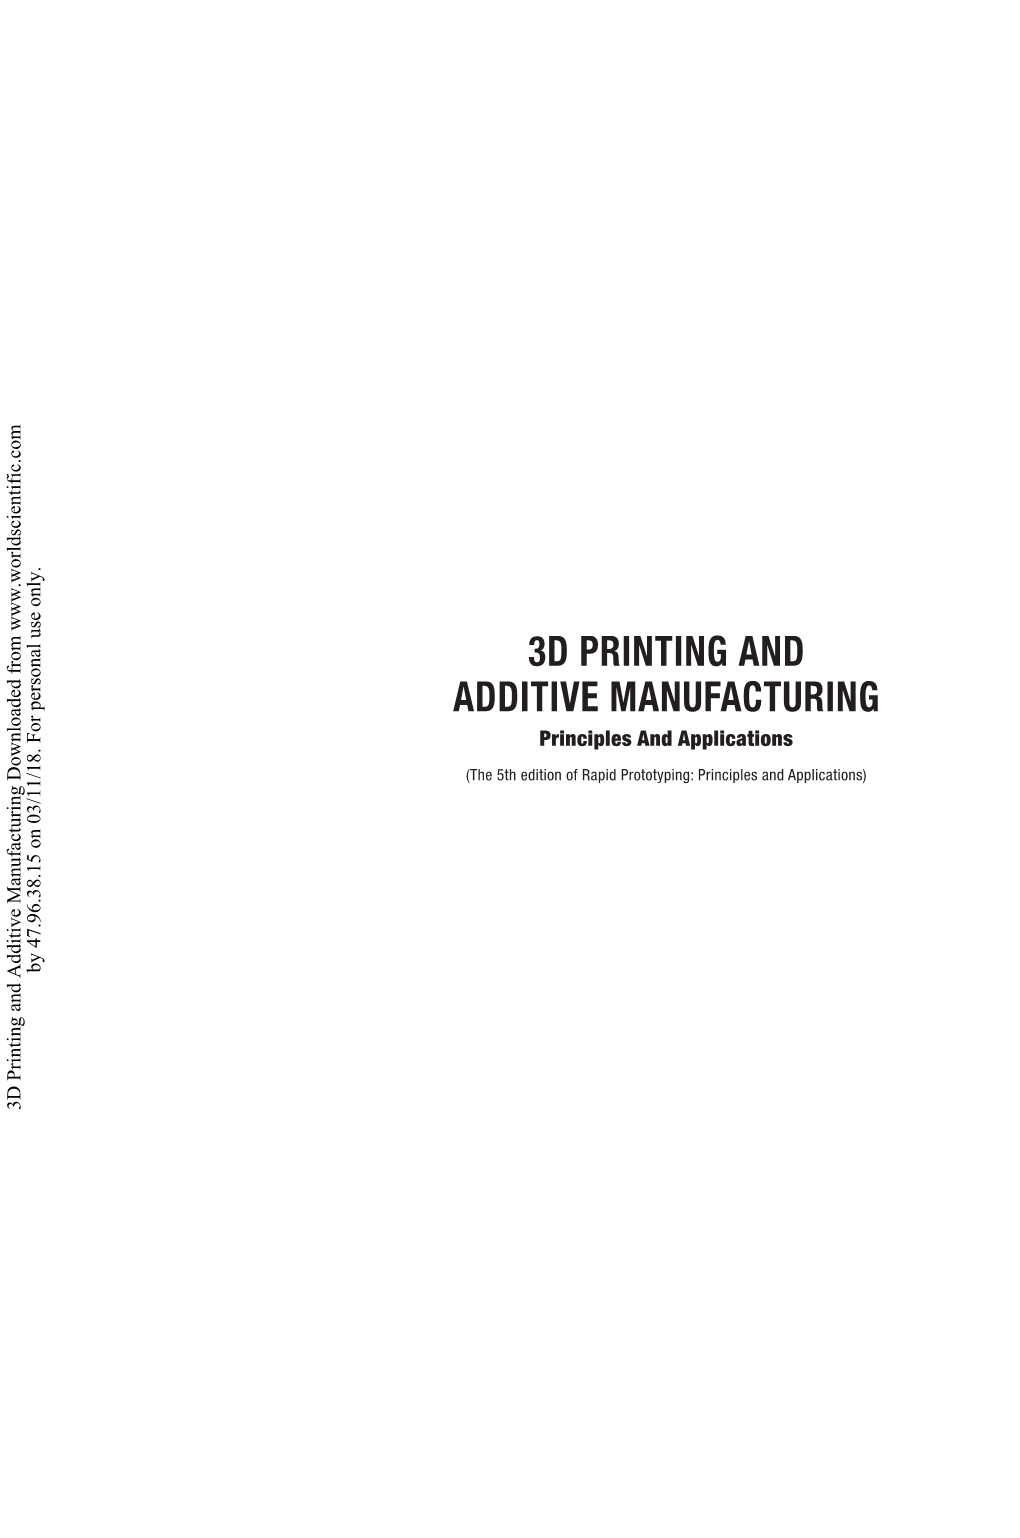 3D PRINTING and ADDITIVE MANUFACTURING Principles and Applications